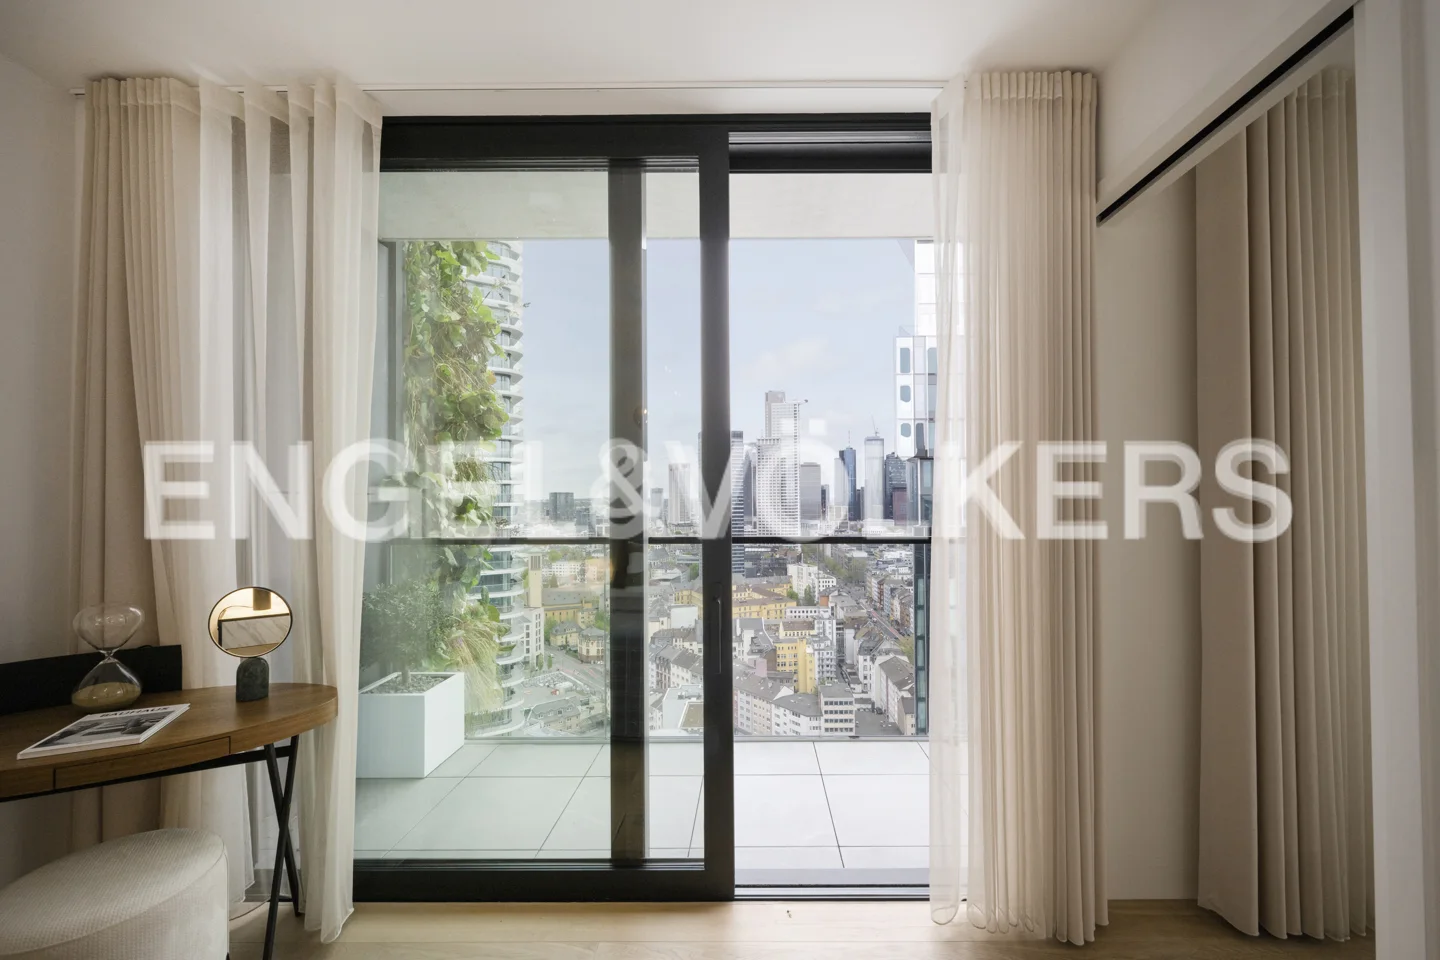 SURROUNDED BY LIFE – Schickes Zwei-Zimmer-Apartment mit Ausblick